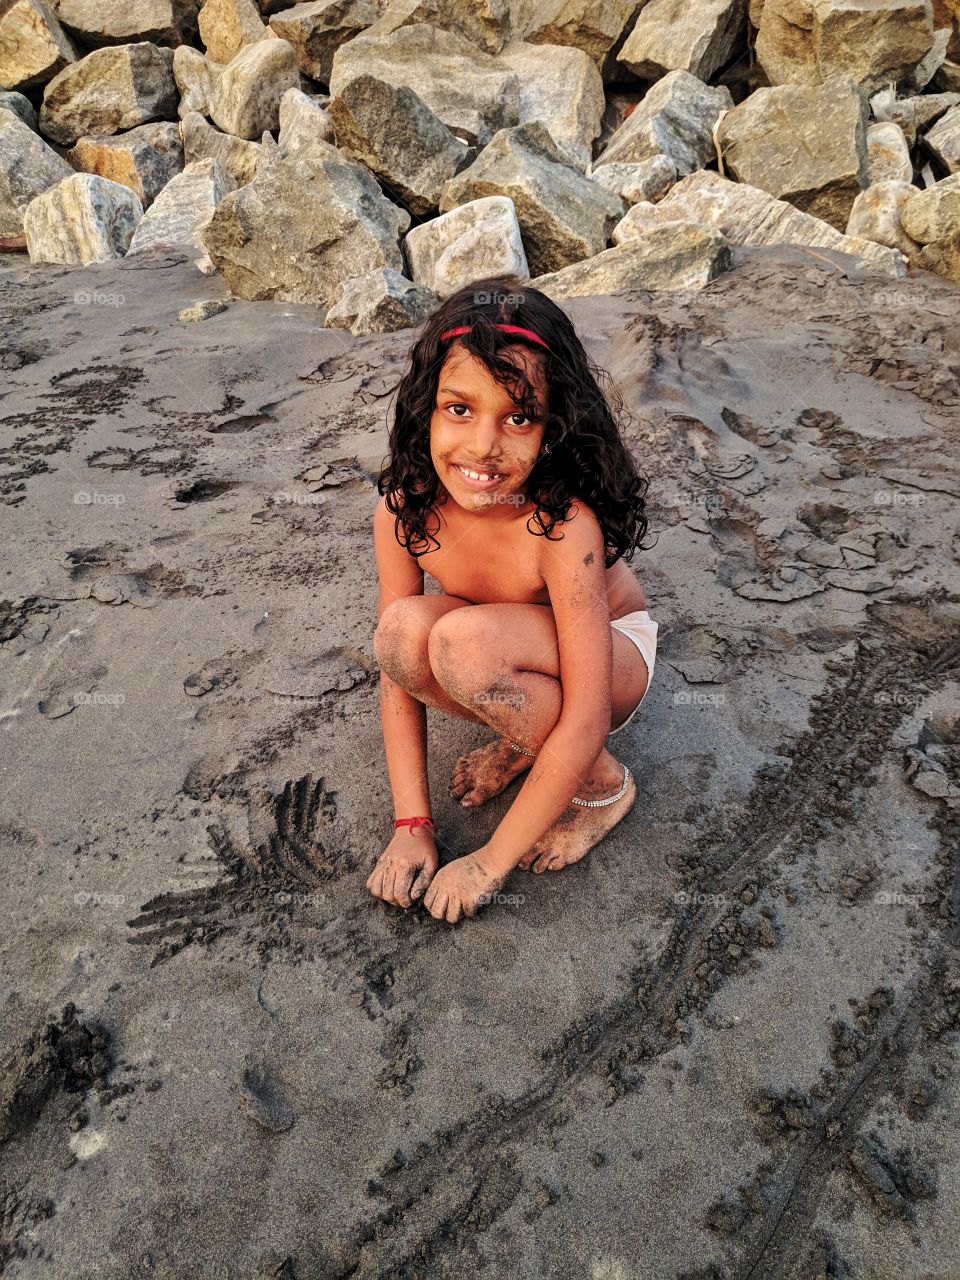 young girl busy in making sand castle..